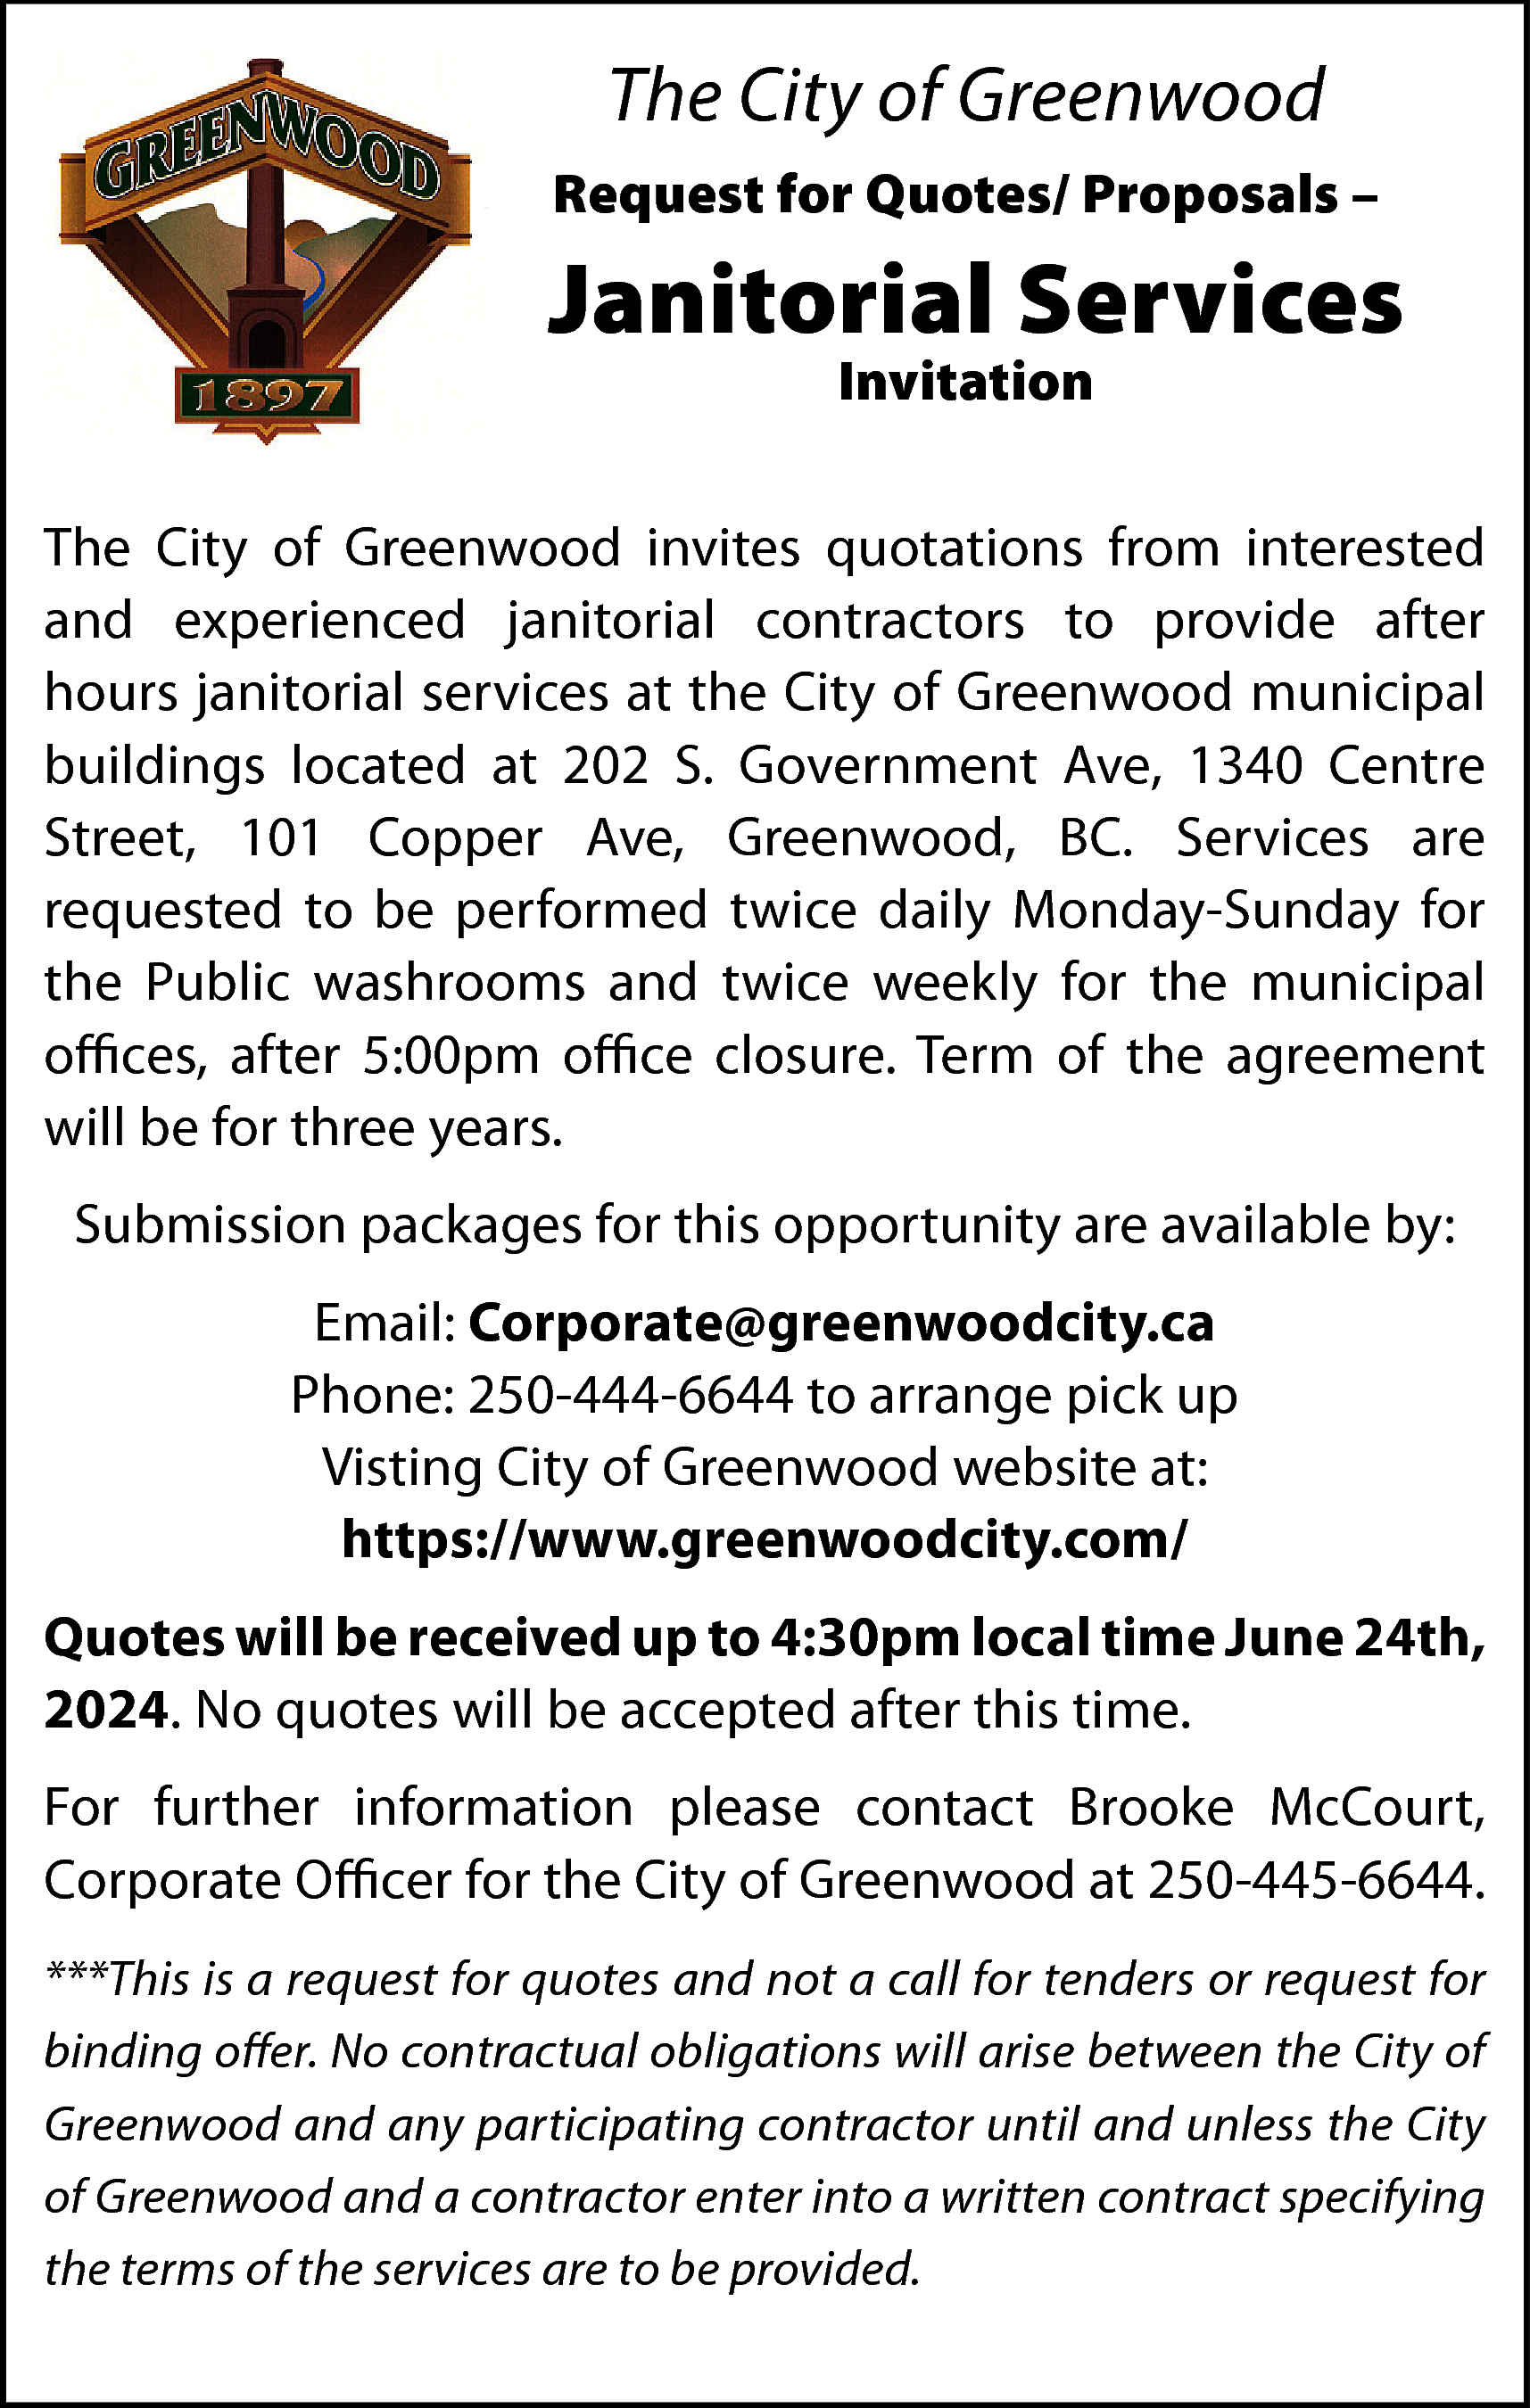 The City of Greenwood <br>Request  The City of Greenwood  Request for Quotes/ Proposals –    Janitorial Services  Invitation    The City of Greenwood invites quotations from interested  and experienced janitorial contractors to provide after  hours janitorial services at the City of Greenwood municipal  buildings located at 202 S. Government Ave, 1340 Centre  Street, 101 Copper Ave, Greenwood, BC. Services are  requested to be performed twice daily Monday-Sunday for  the Public washrooms and twice weekly for the municipal  offices, after 5:00pm office closure. Term of the agreement  will be for three years.  Submission packages for this opportunity are available by:  Email: Corporate@greenwoodcity.ca  Phone: 250-444-6644 to arrange pick up  Visting City of Greenwood website at:  https://www.greenwoodcity.com/  Quotes will be received up to 4:30pm local time June 24th,  2024. No quotes will be accepted after this time.  For further information please contact Brooke McCourt,  Corporate Officer for the City of Greenwood at 250-445-6644.  ***This is a request for quotes and not a call for tenders or request for  binding offer. No contractual obligations will arise between the City of  Greenwood and any participating contractor until and unless the City  of Greenwood and a contractor enter into a written contract specifying  the terms of the services are to be provided.    